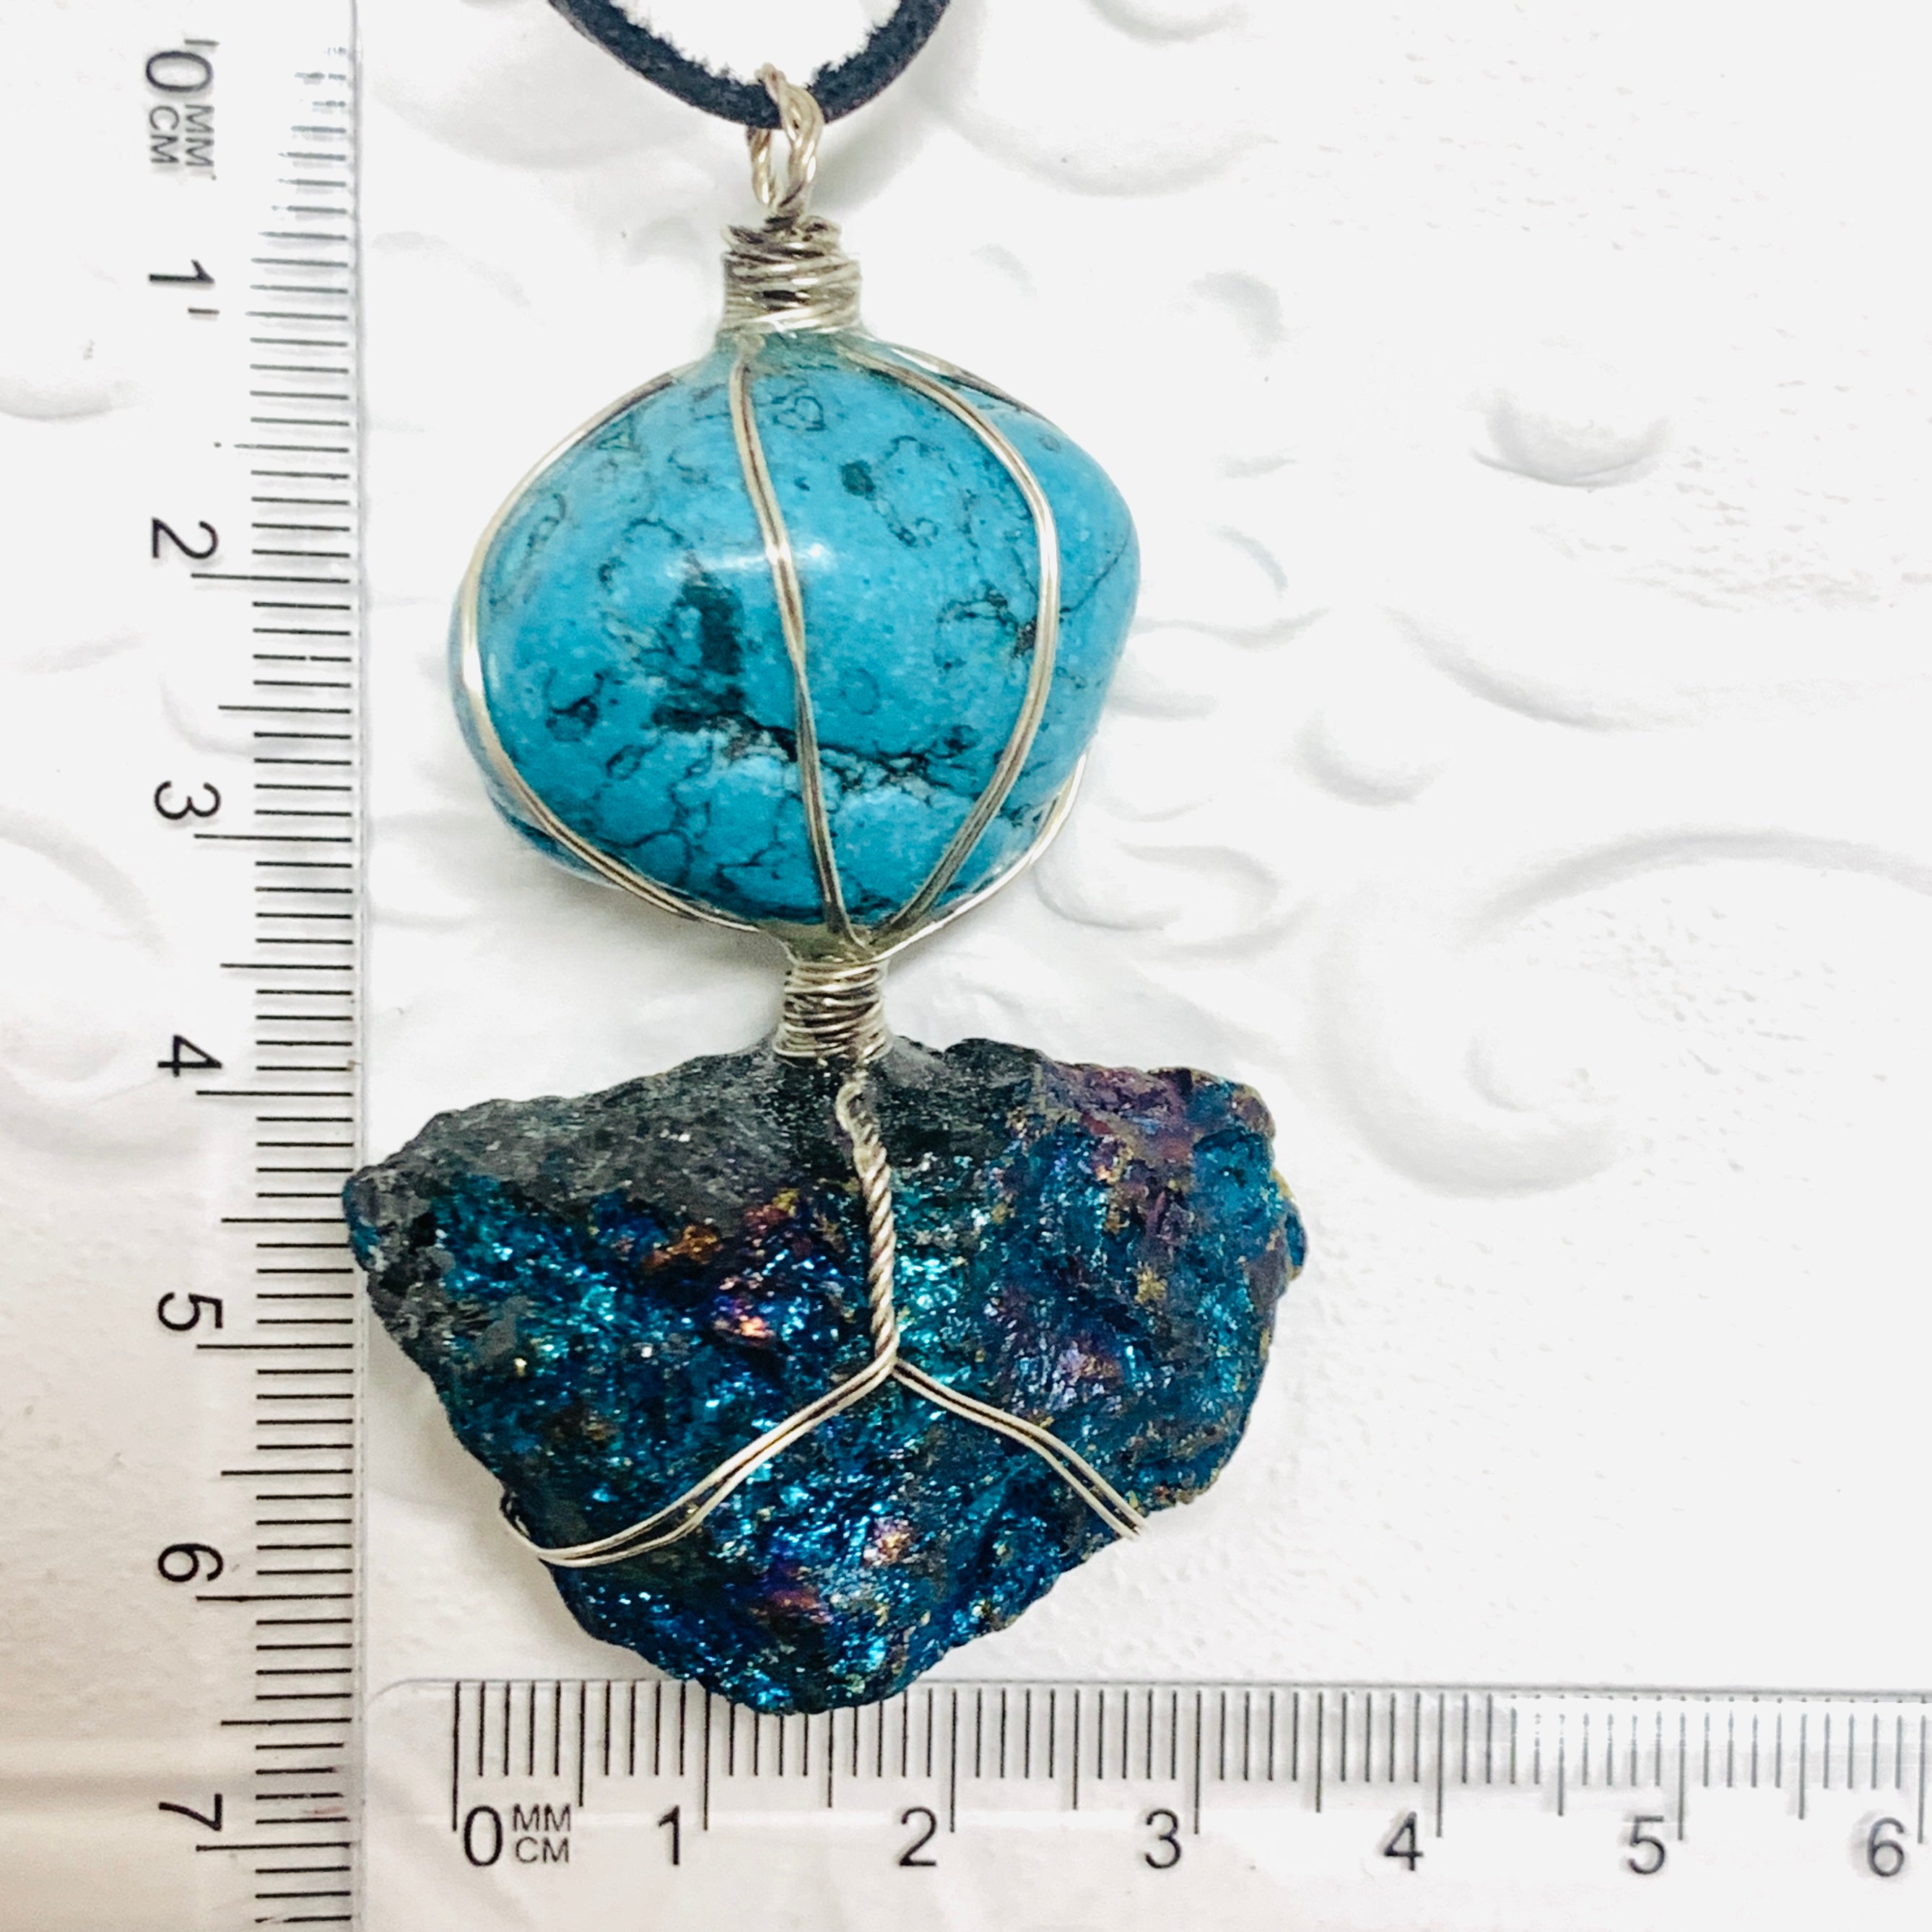 Howlite and Peacock Ore Necklace